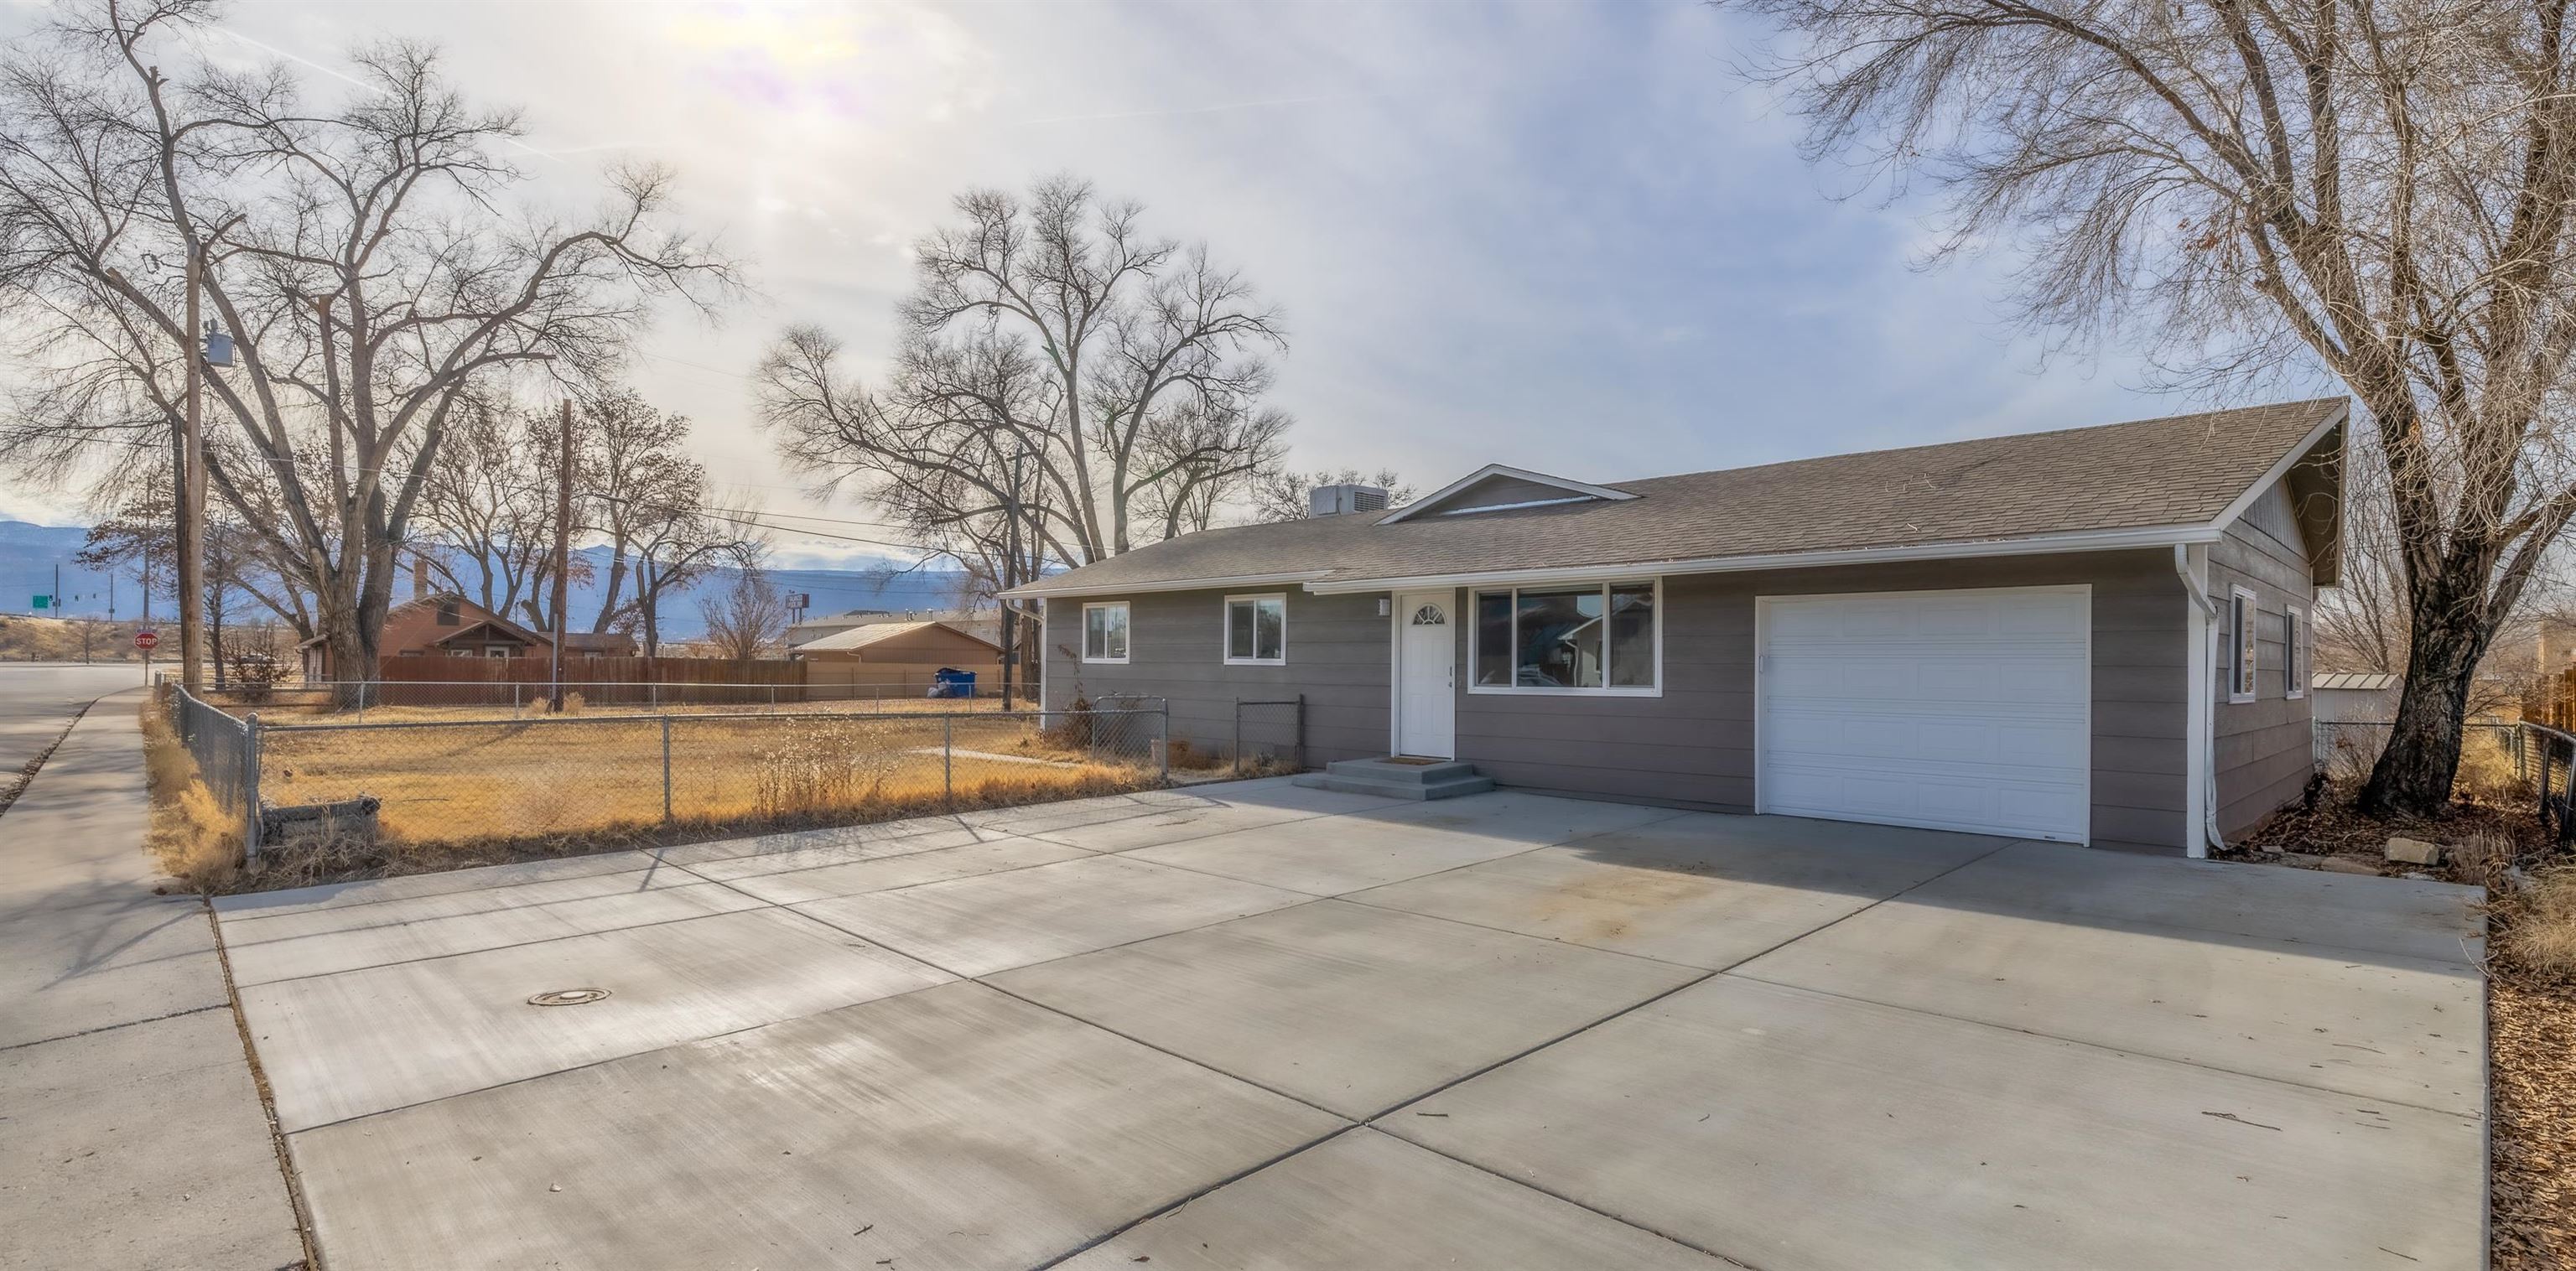 Unique opportunity to get a Multi-Use property in Fruita. Get inside this clean, bright well laid out home in Fruita, Colorado. It was fully remodeled in 2023 with new furnace & central air. Large custom gazebo in the backyard, storage throughout the home, with new paint, flooring and cabinets. It doesn't stop there though. This 4 Bed 2 Bath home sits on .36 acres with a mixed use zoning, near commercial and residential, providing lots of potential. There is room for animals, to grow your own food or build an ADU for additional income or the in-laws. Ready for the new owners or investor looking for rental income.